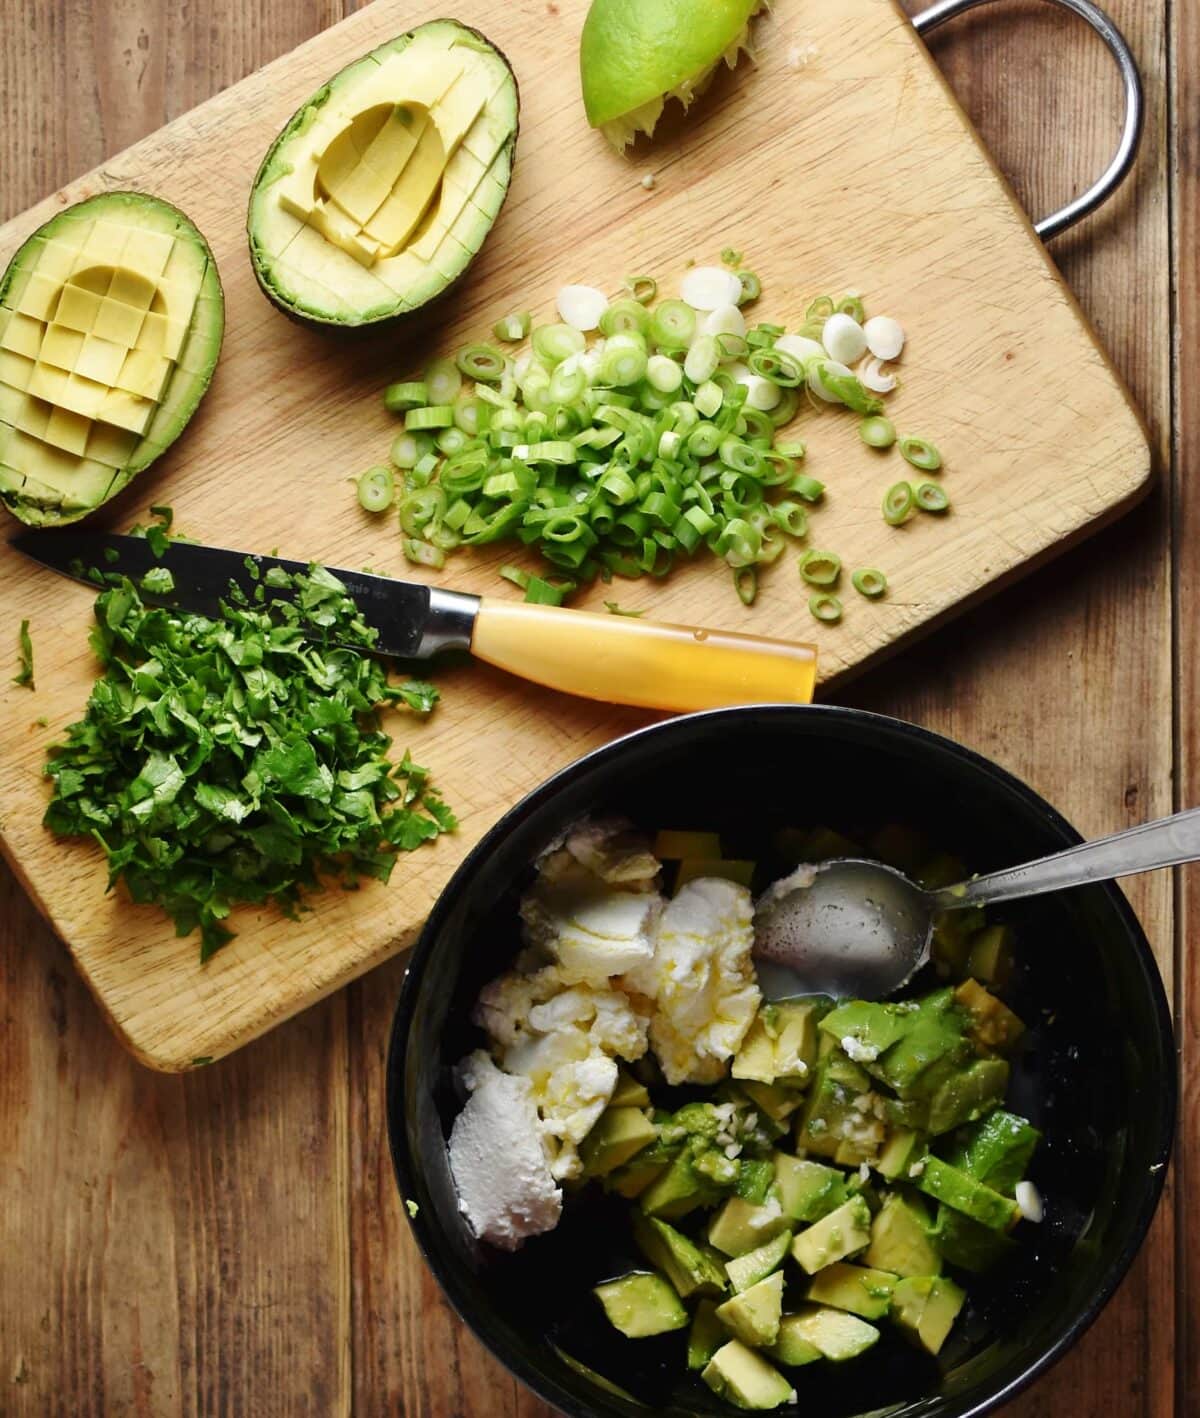 Halved avocado, onions, herbs and knife on top of cutting board and avocado, yogurt and spoon inside black bowl.